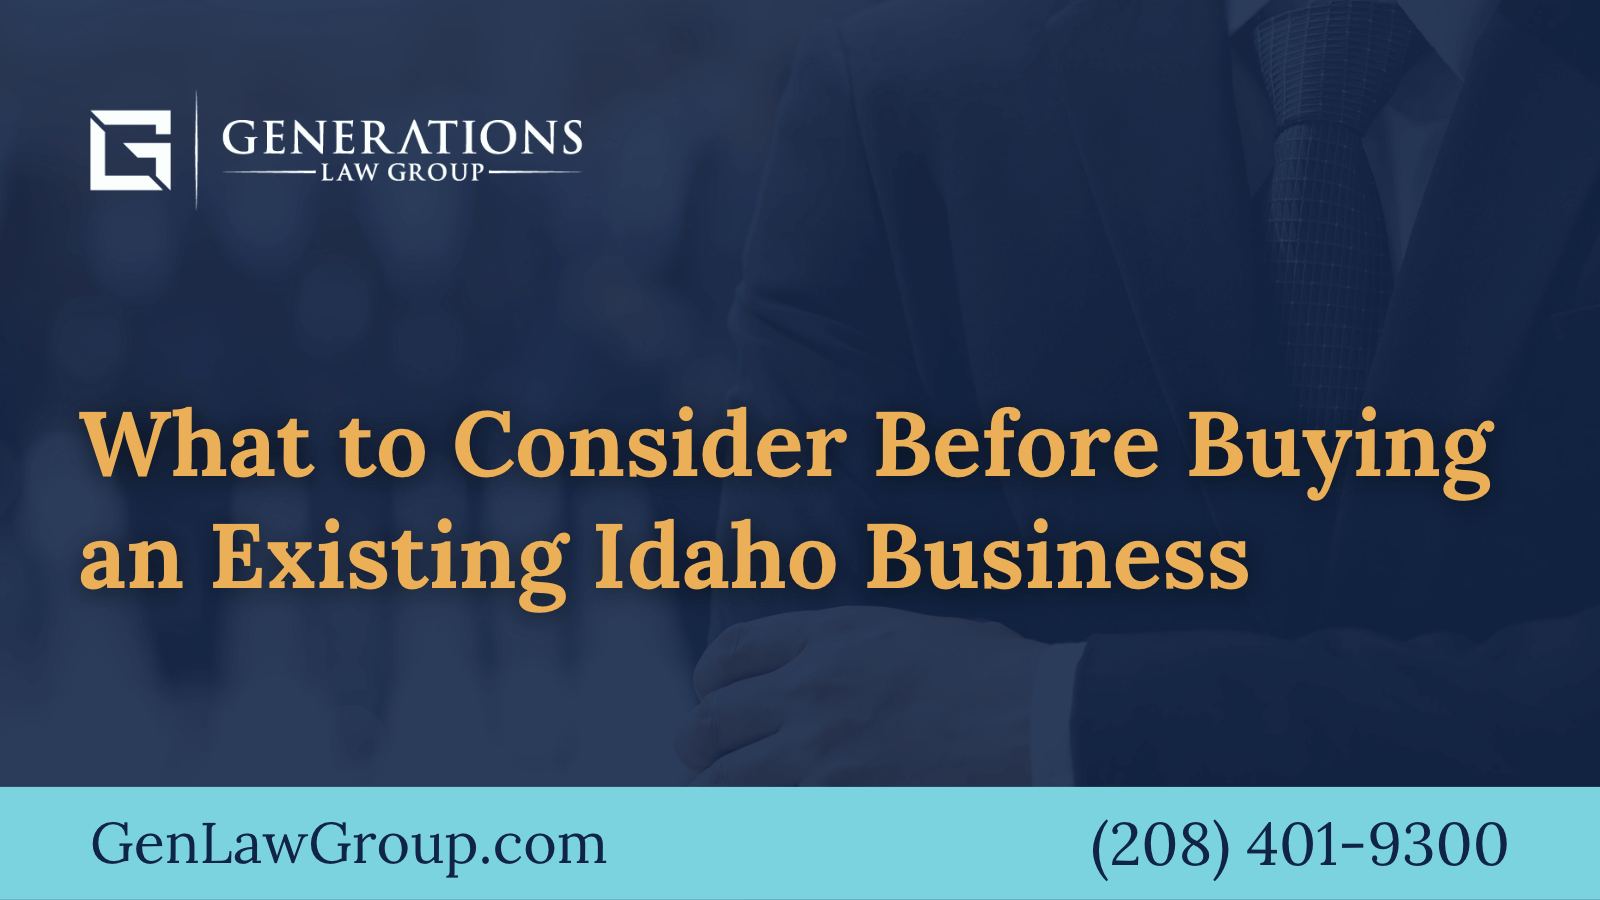 What to Consider Before Buying an Existing Idaho Business